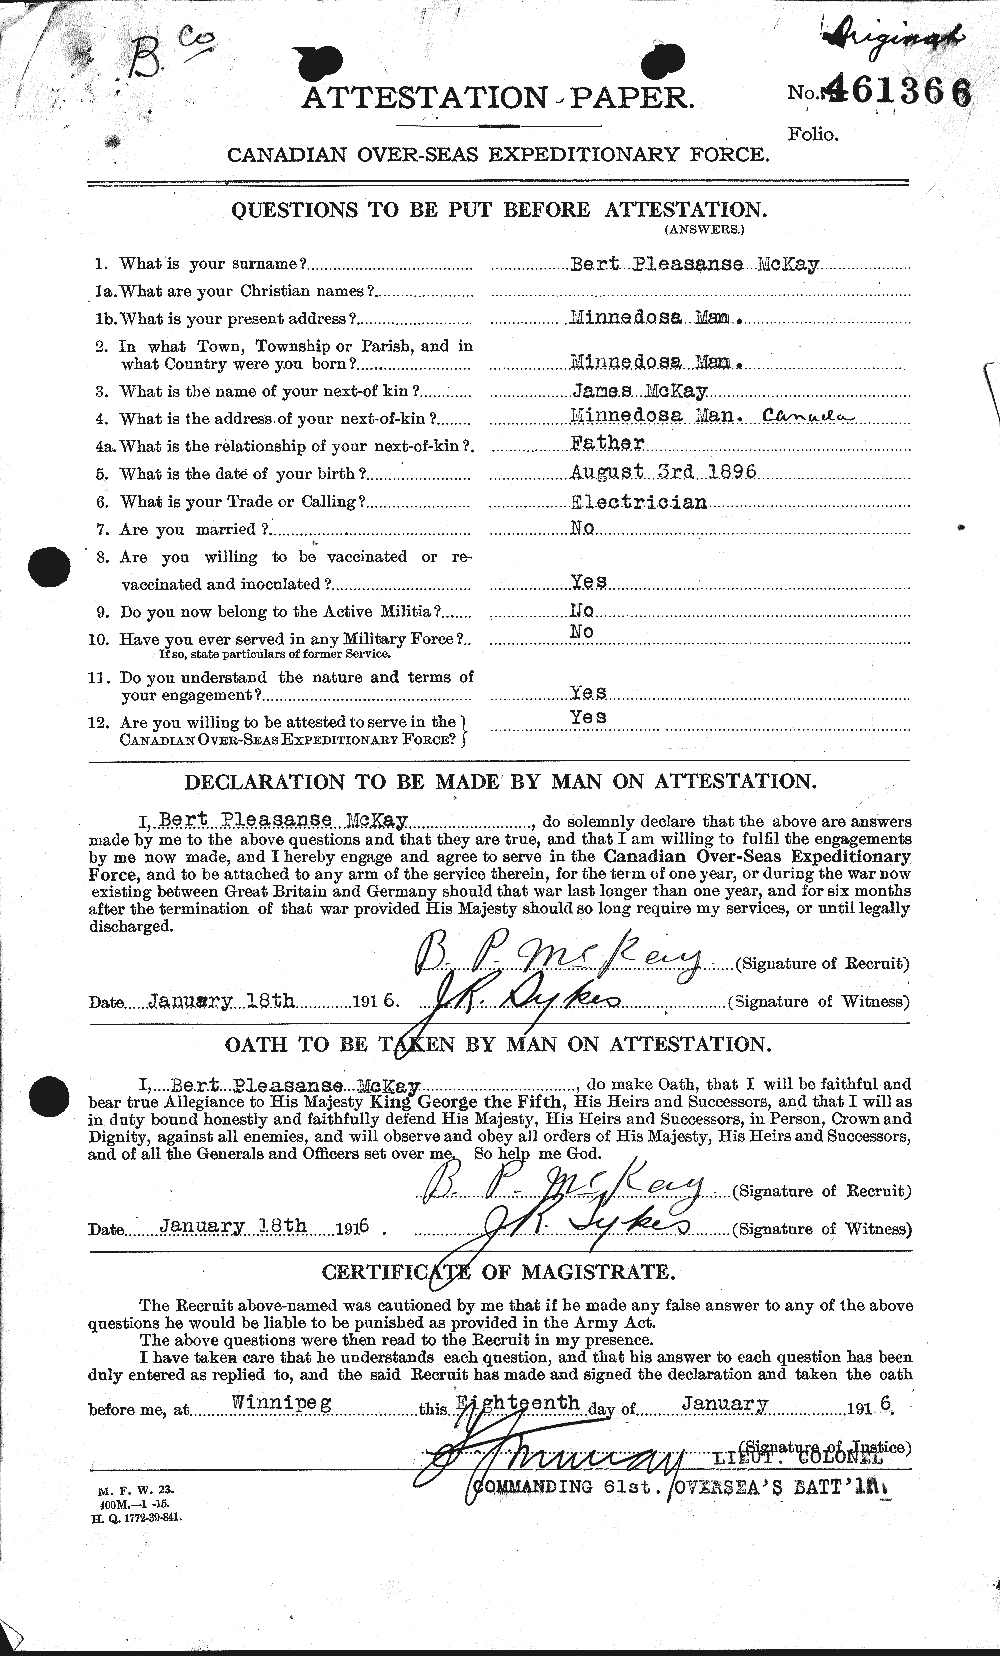 Personnel Records of the First World War - CEF 531043a